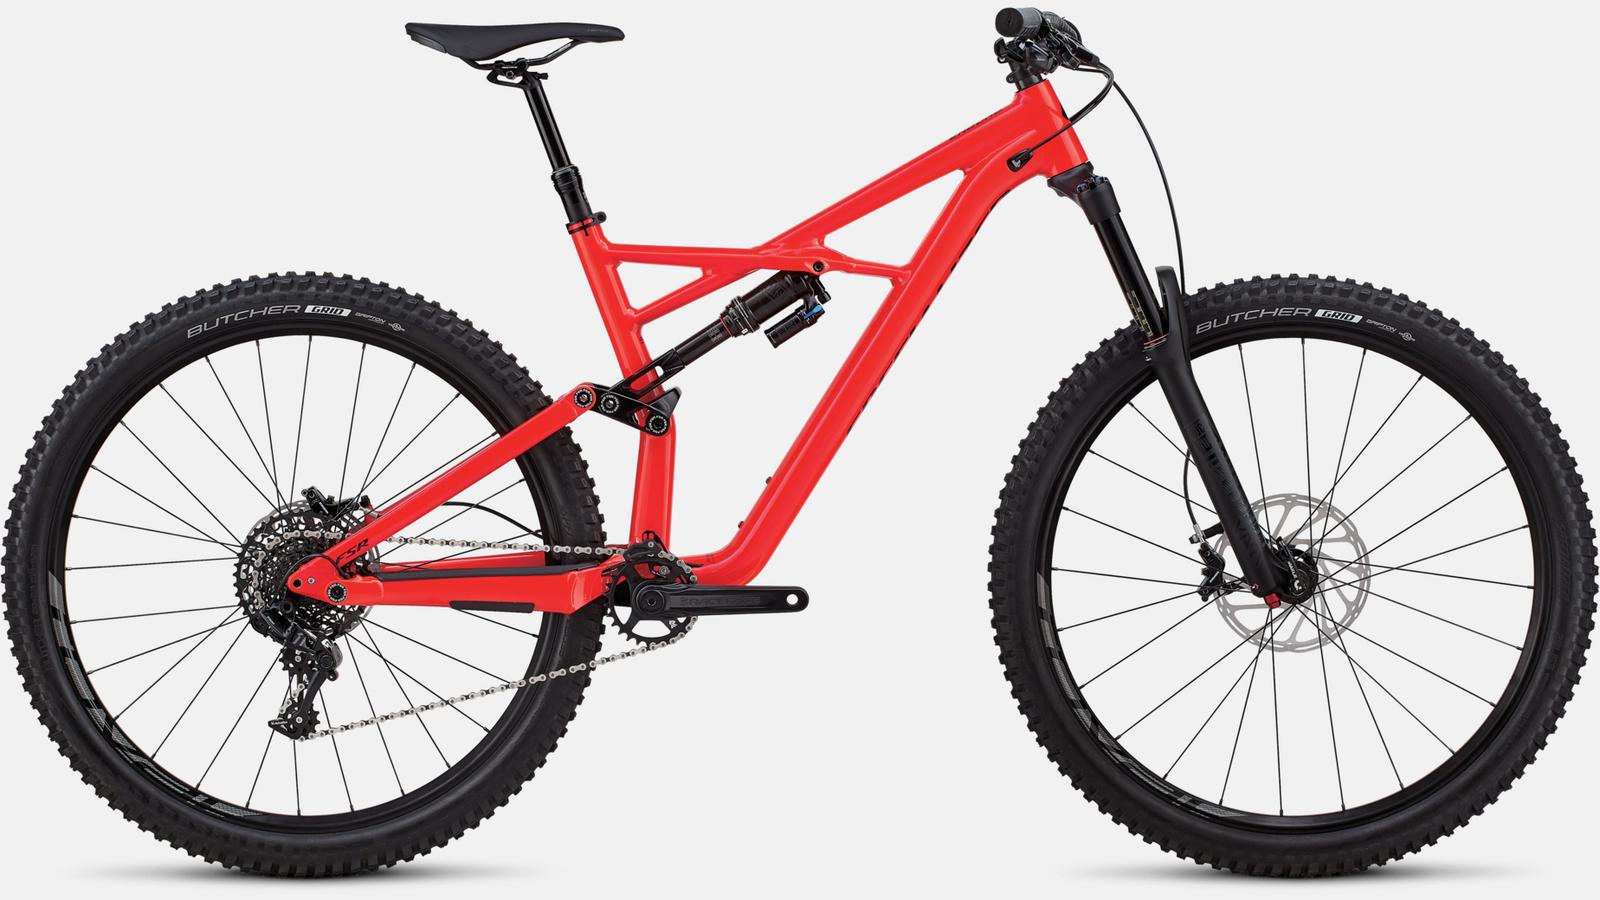 Paint for 2018 Specialized Enduro Comp 29/6Fattie - Gloss Rocket Red